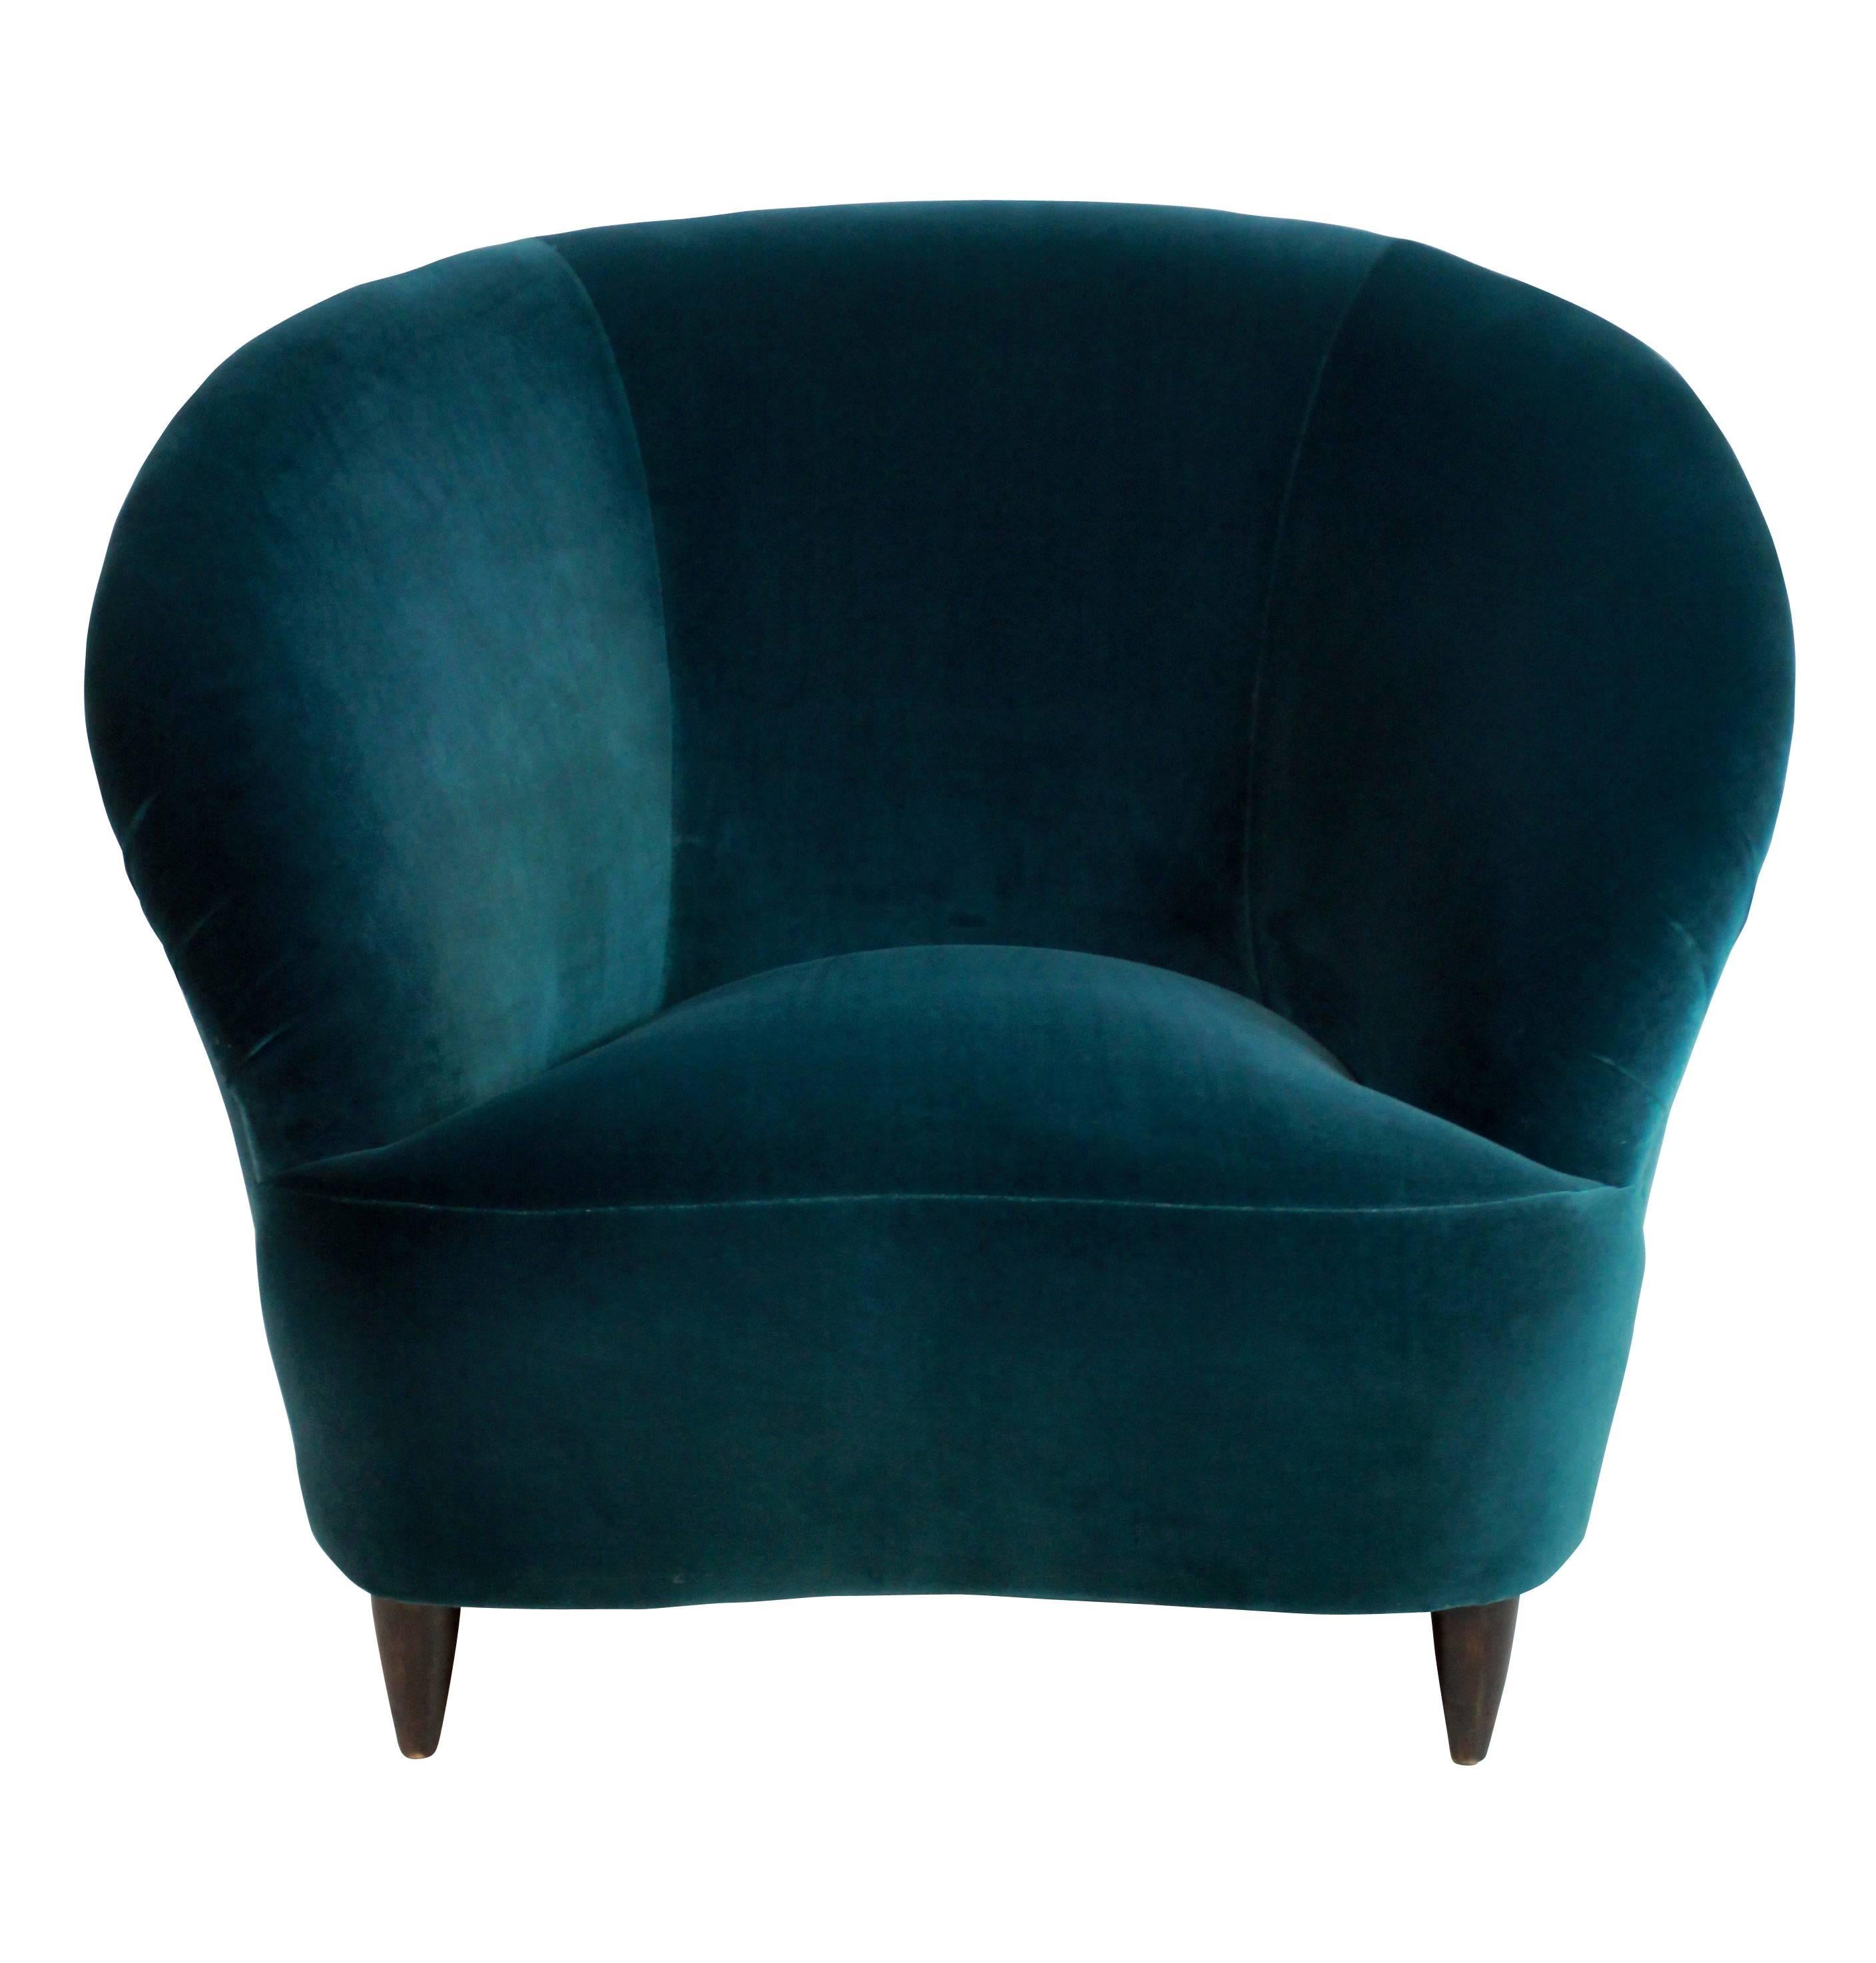 A pair of large Italian sculptural lounge chairs by Parisi. On turned French polished legs. Photographed here in teal velvet but can be upholstered in a fabric of your choice.

 